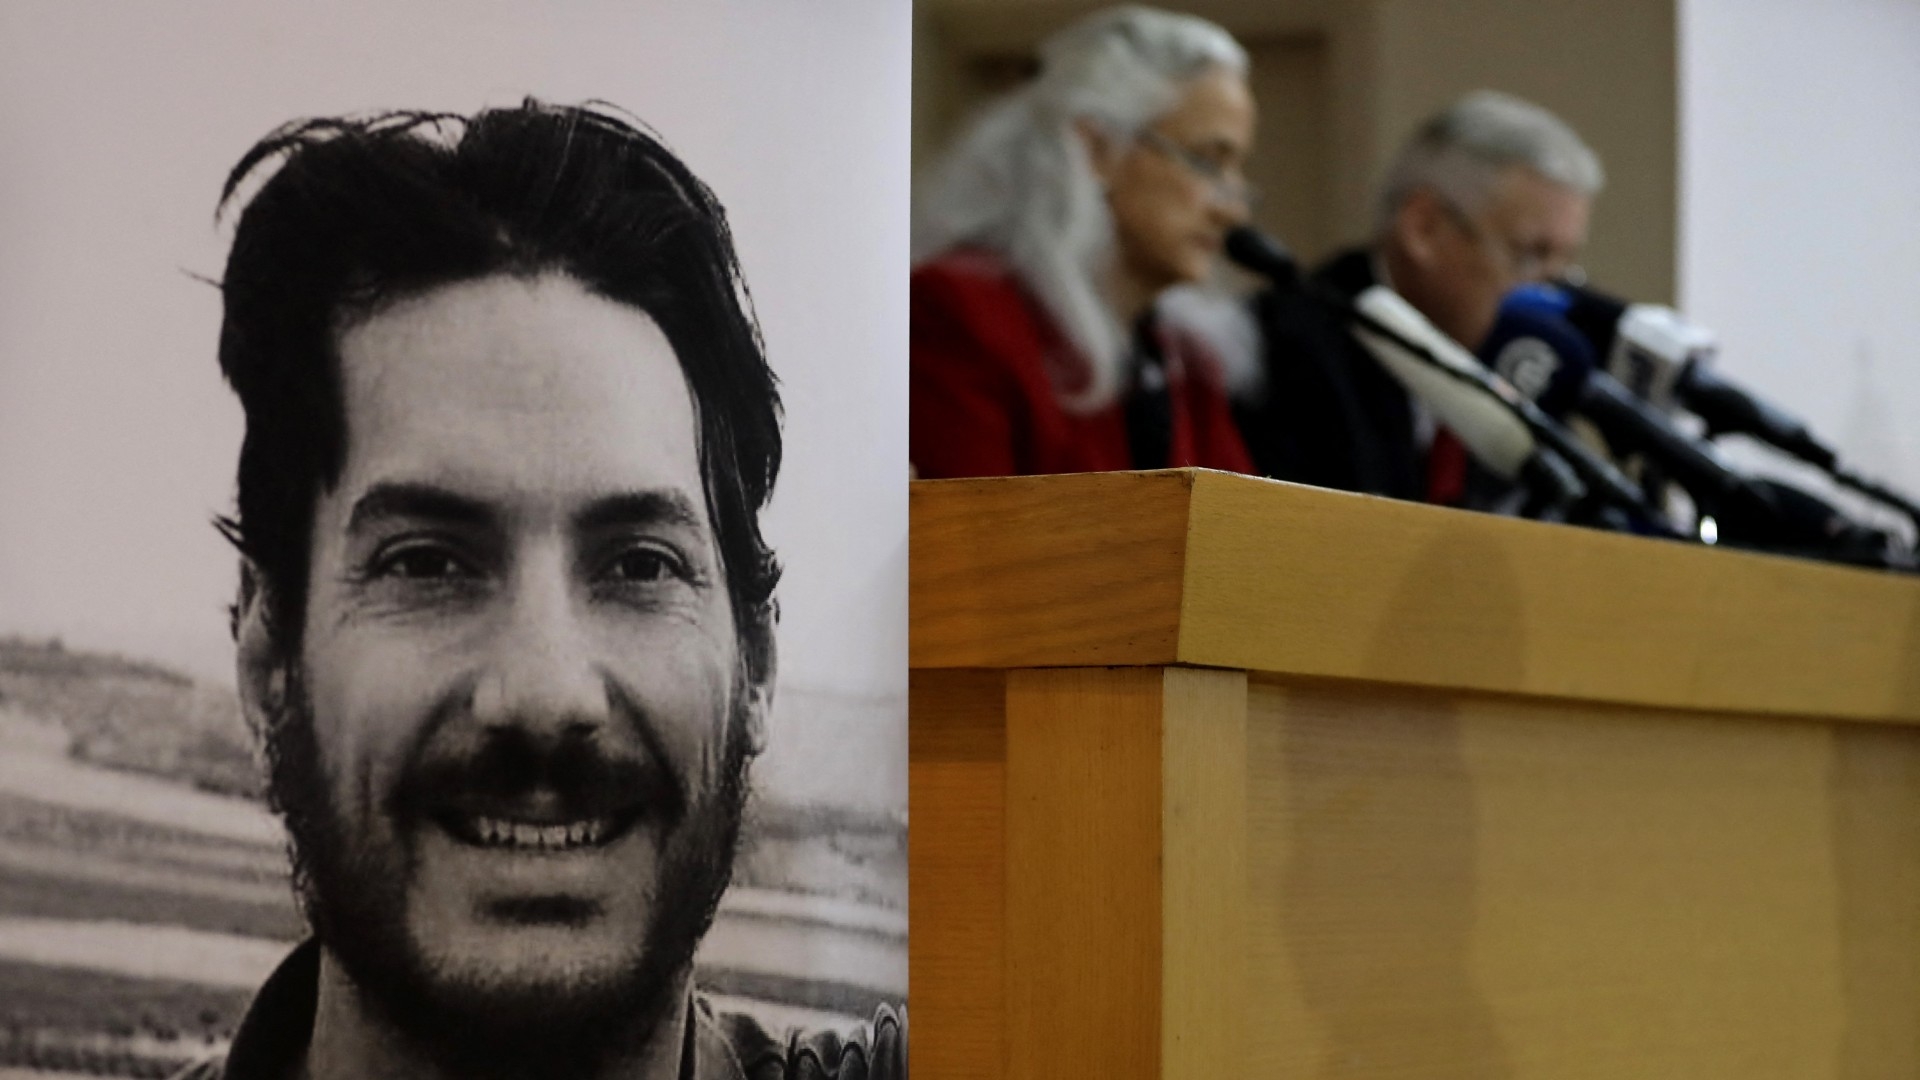 Tice was a freelance photojournalist when he disappeared on 14 August 2012 after being detained at a checkpoint near Damascus.